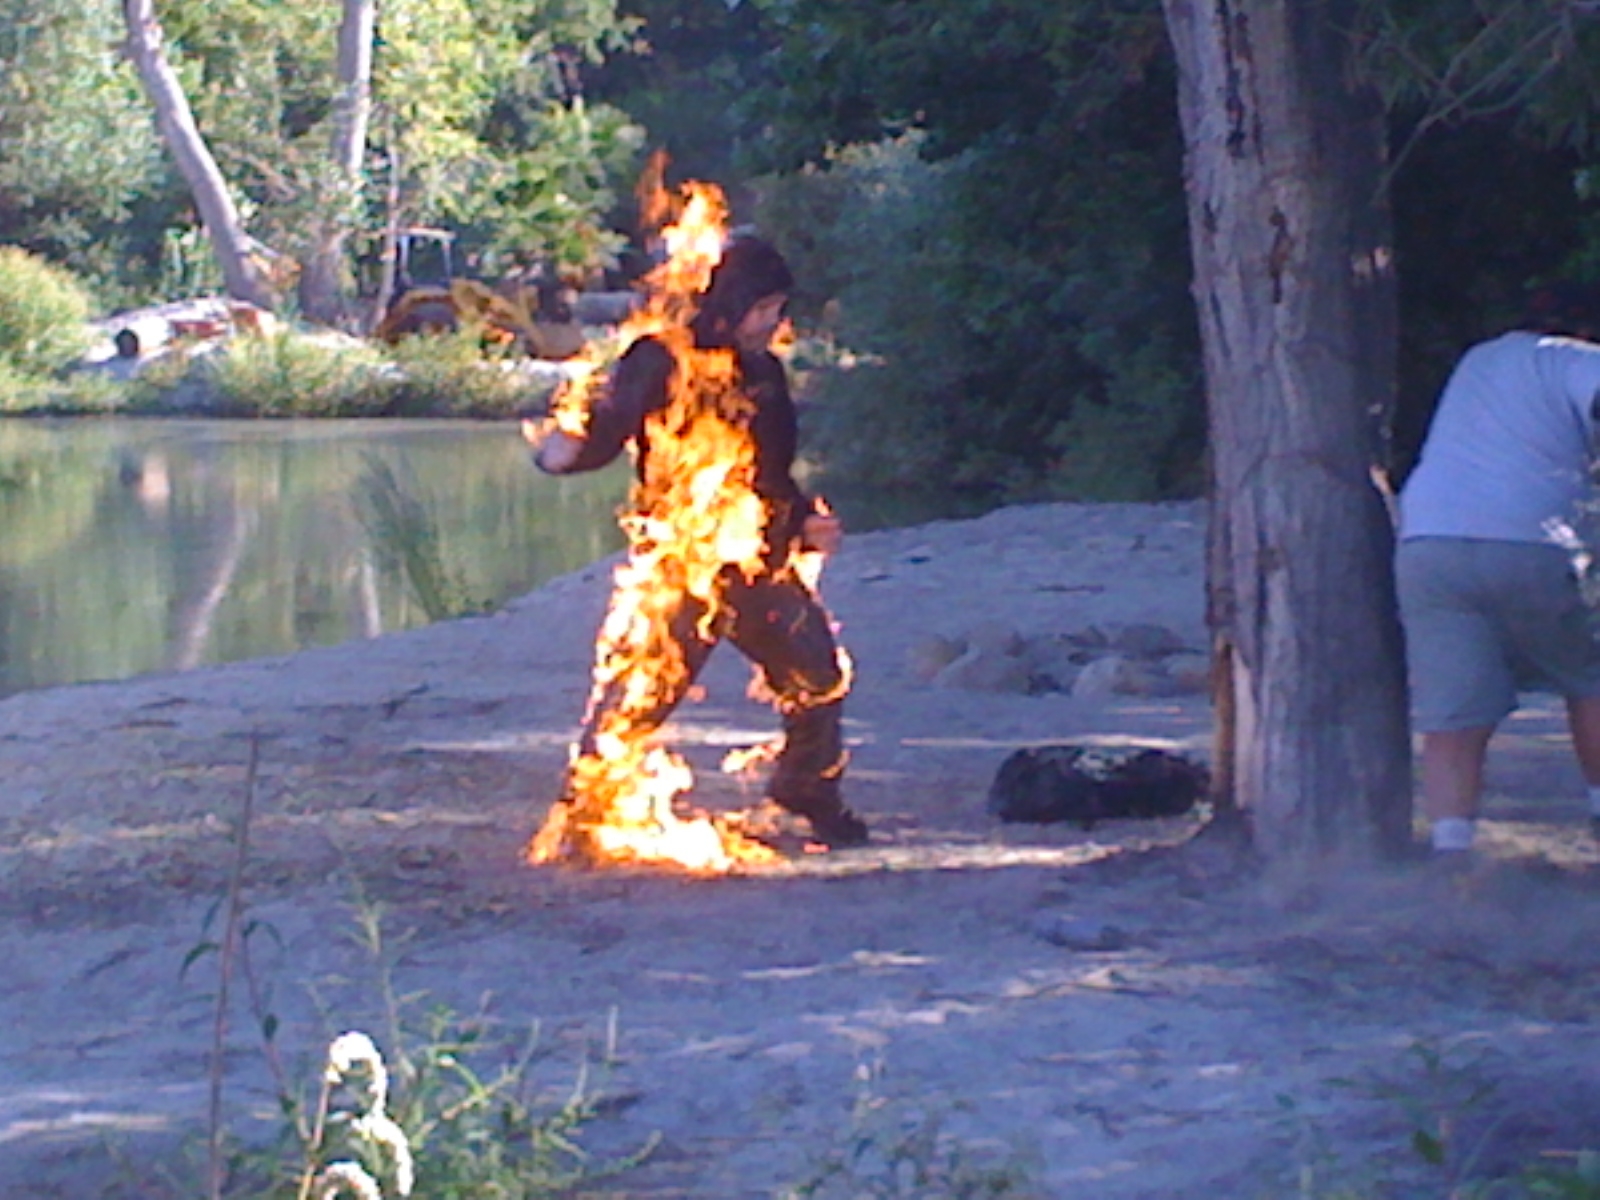 3/4 Fire Burn on a TV series. 'I only smoke when I'm on Fire!'